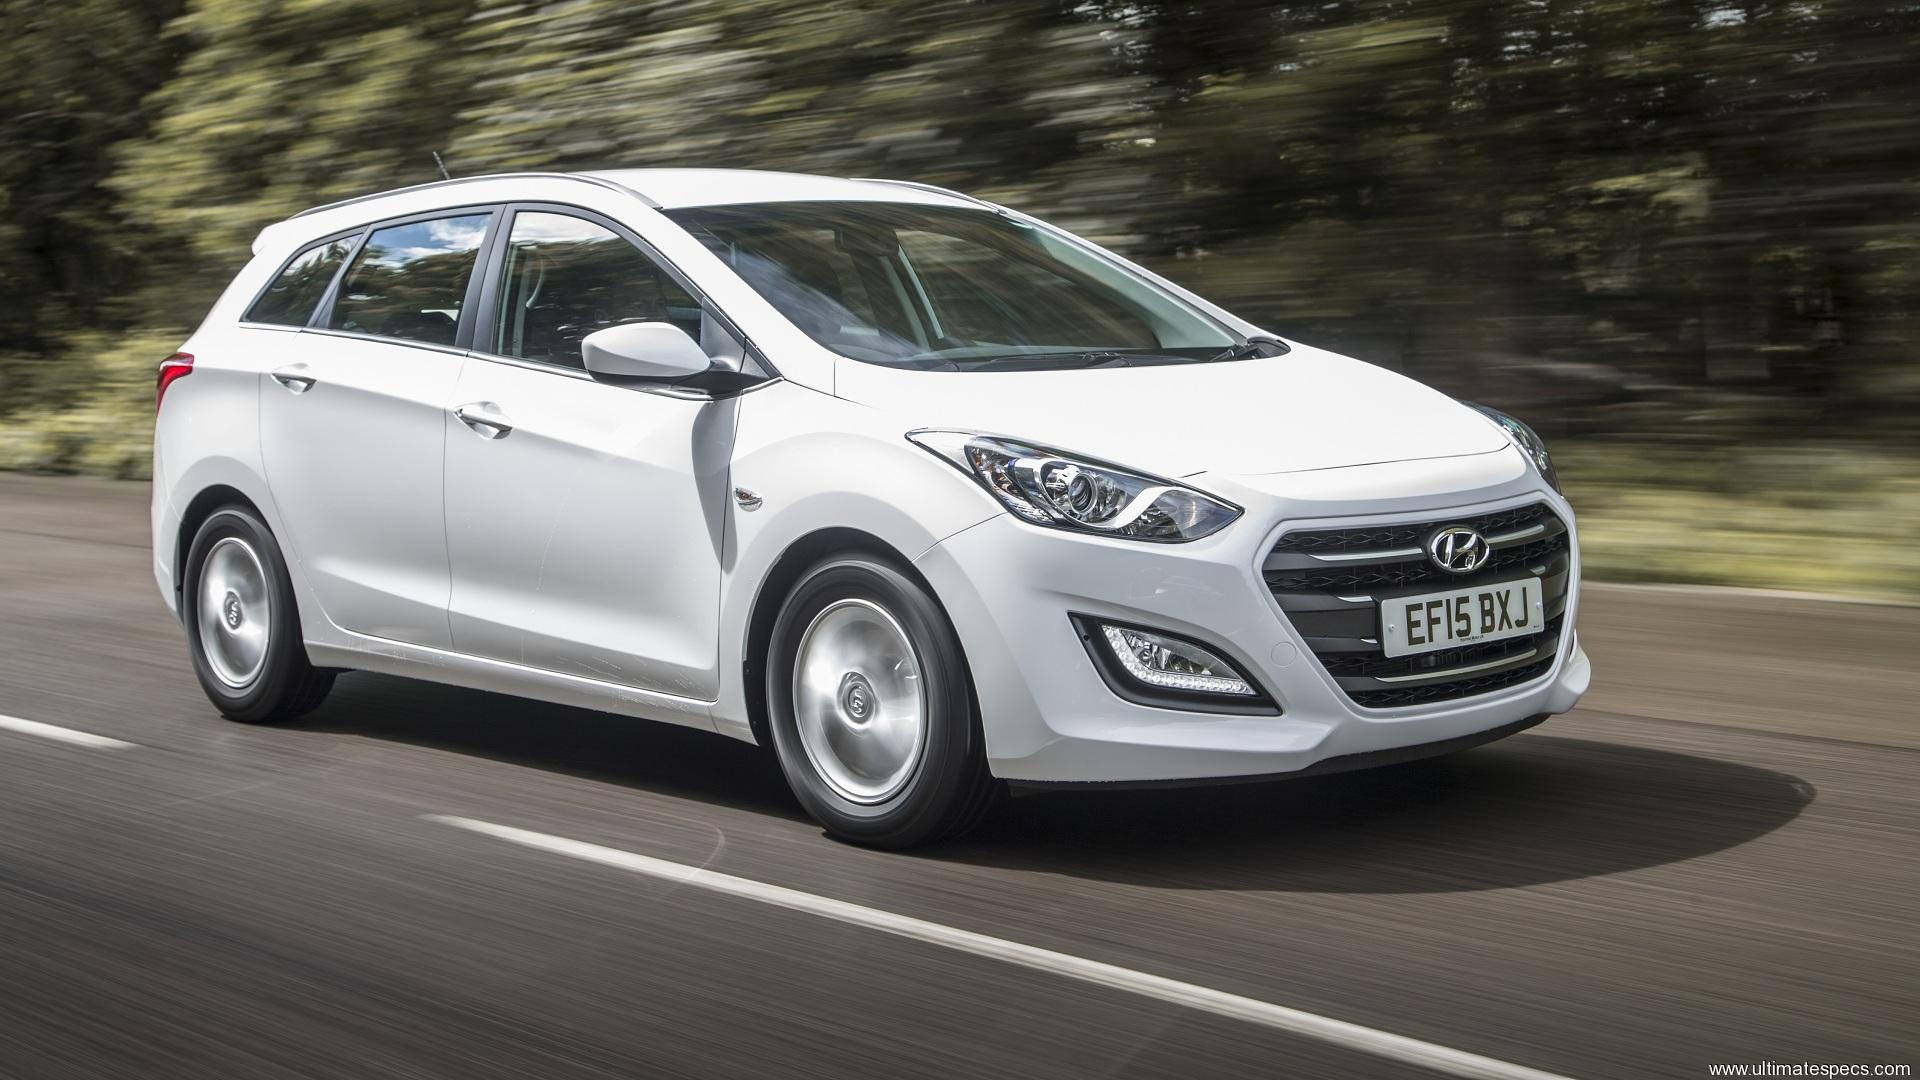 Hyundai i30 II 2015 CW Images, pictures, gallery